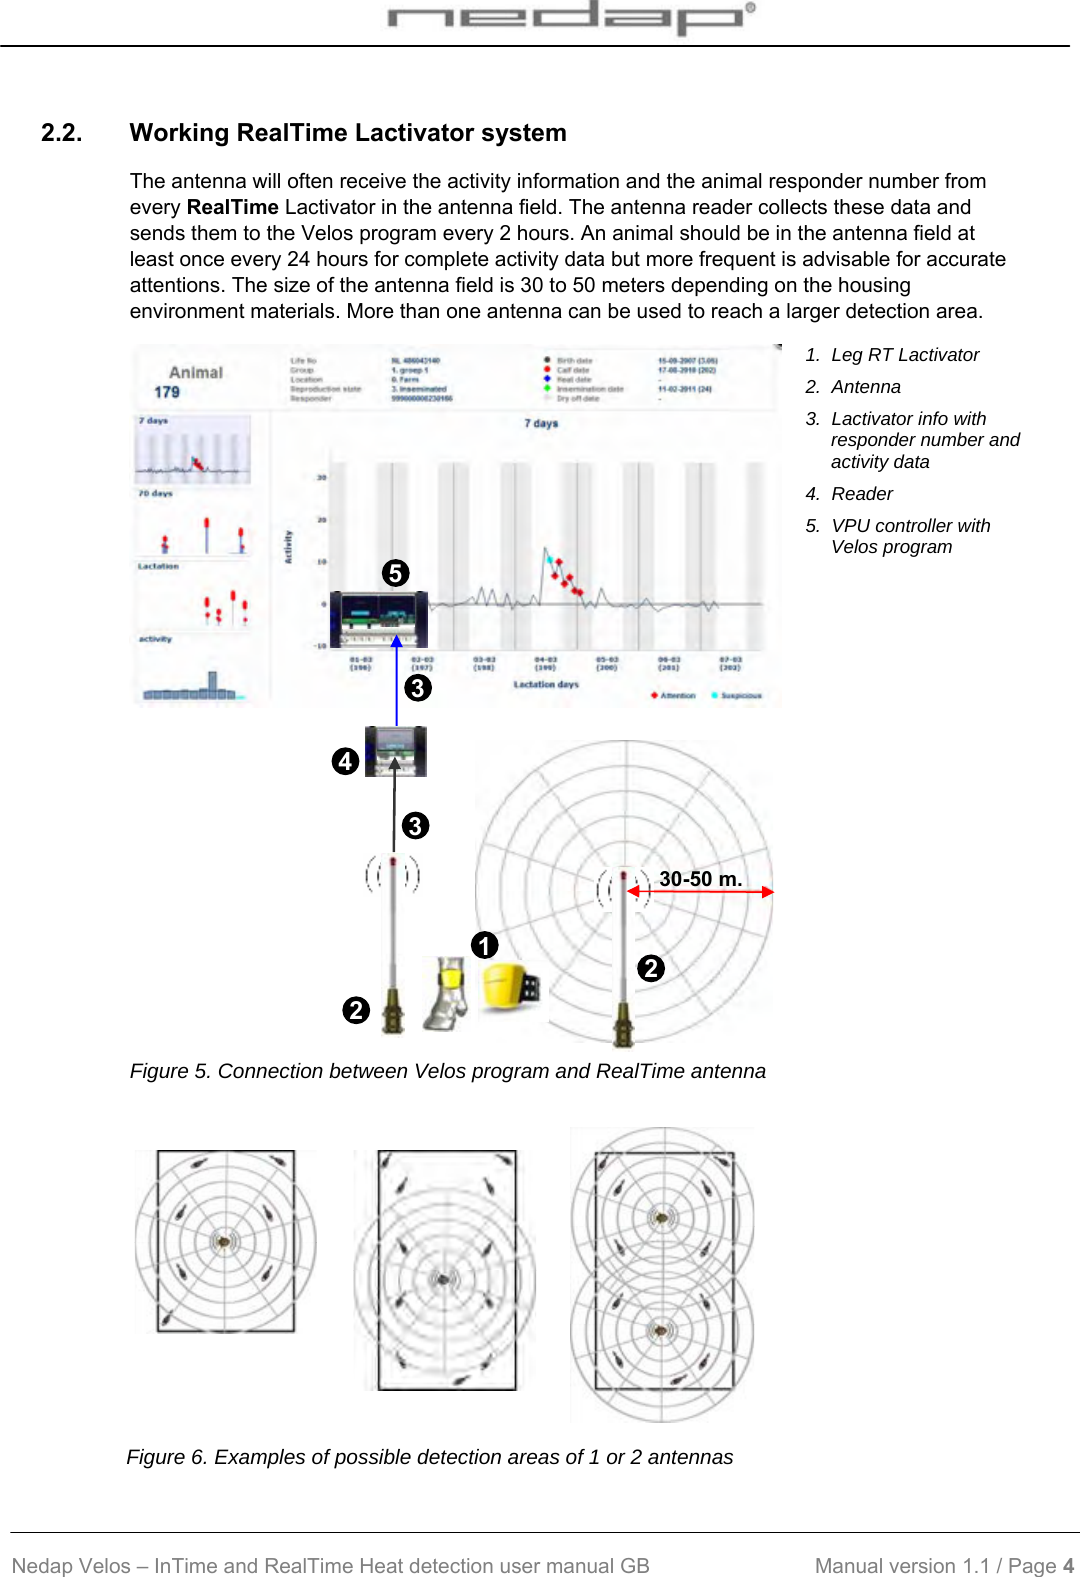  Nedap Velos – InTime and RealTime Heat detection user manual GB                            Manual version 1.1 / Page 4  2.2.  Working RealTime Lactivator system The antenna will often receive the activity information and the animal responder number from every RealTime Lactivator in the antenna field. The antenna reader collects these data and sends them to the Velos program every 2 hours. An animal should be in the antenna field at least once every 24 hours for complete activity data but more frequent is advisable for accurate attentions. The size of the antenna field is 30 to 50 meters depending on the housing environment materials. More than one antenna can be used to reach a larger detection area.             1.  Leg RT Lactivator 2.  Antenna 3.  Lactivator info with responder number and activity data 4.  Reader 5.  VPU controller with Velos program    Figure 5. Connection between Velos program and RealTime antenna        Figure 6. Examples of possible detection areas of 1 or 2 antennas 30-50 m. 2 4 2 3 13 5 